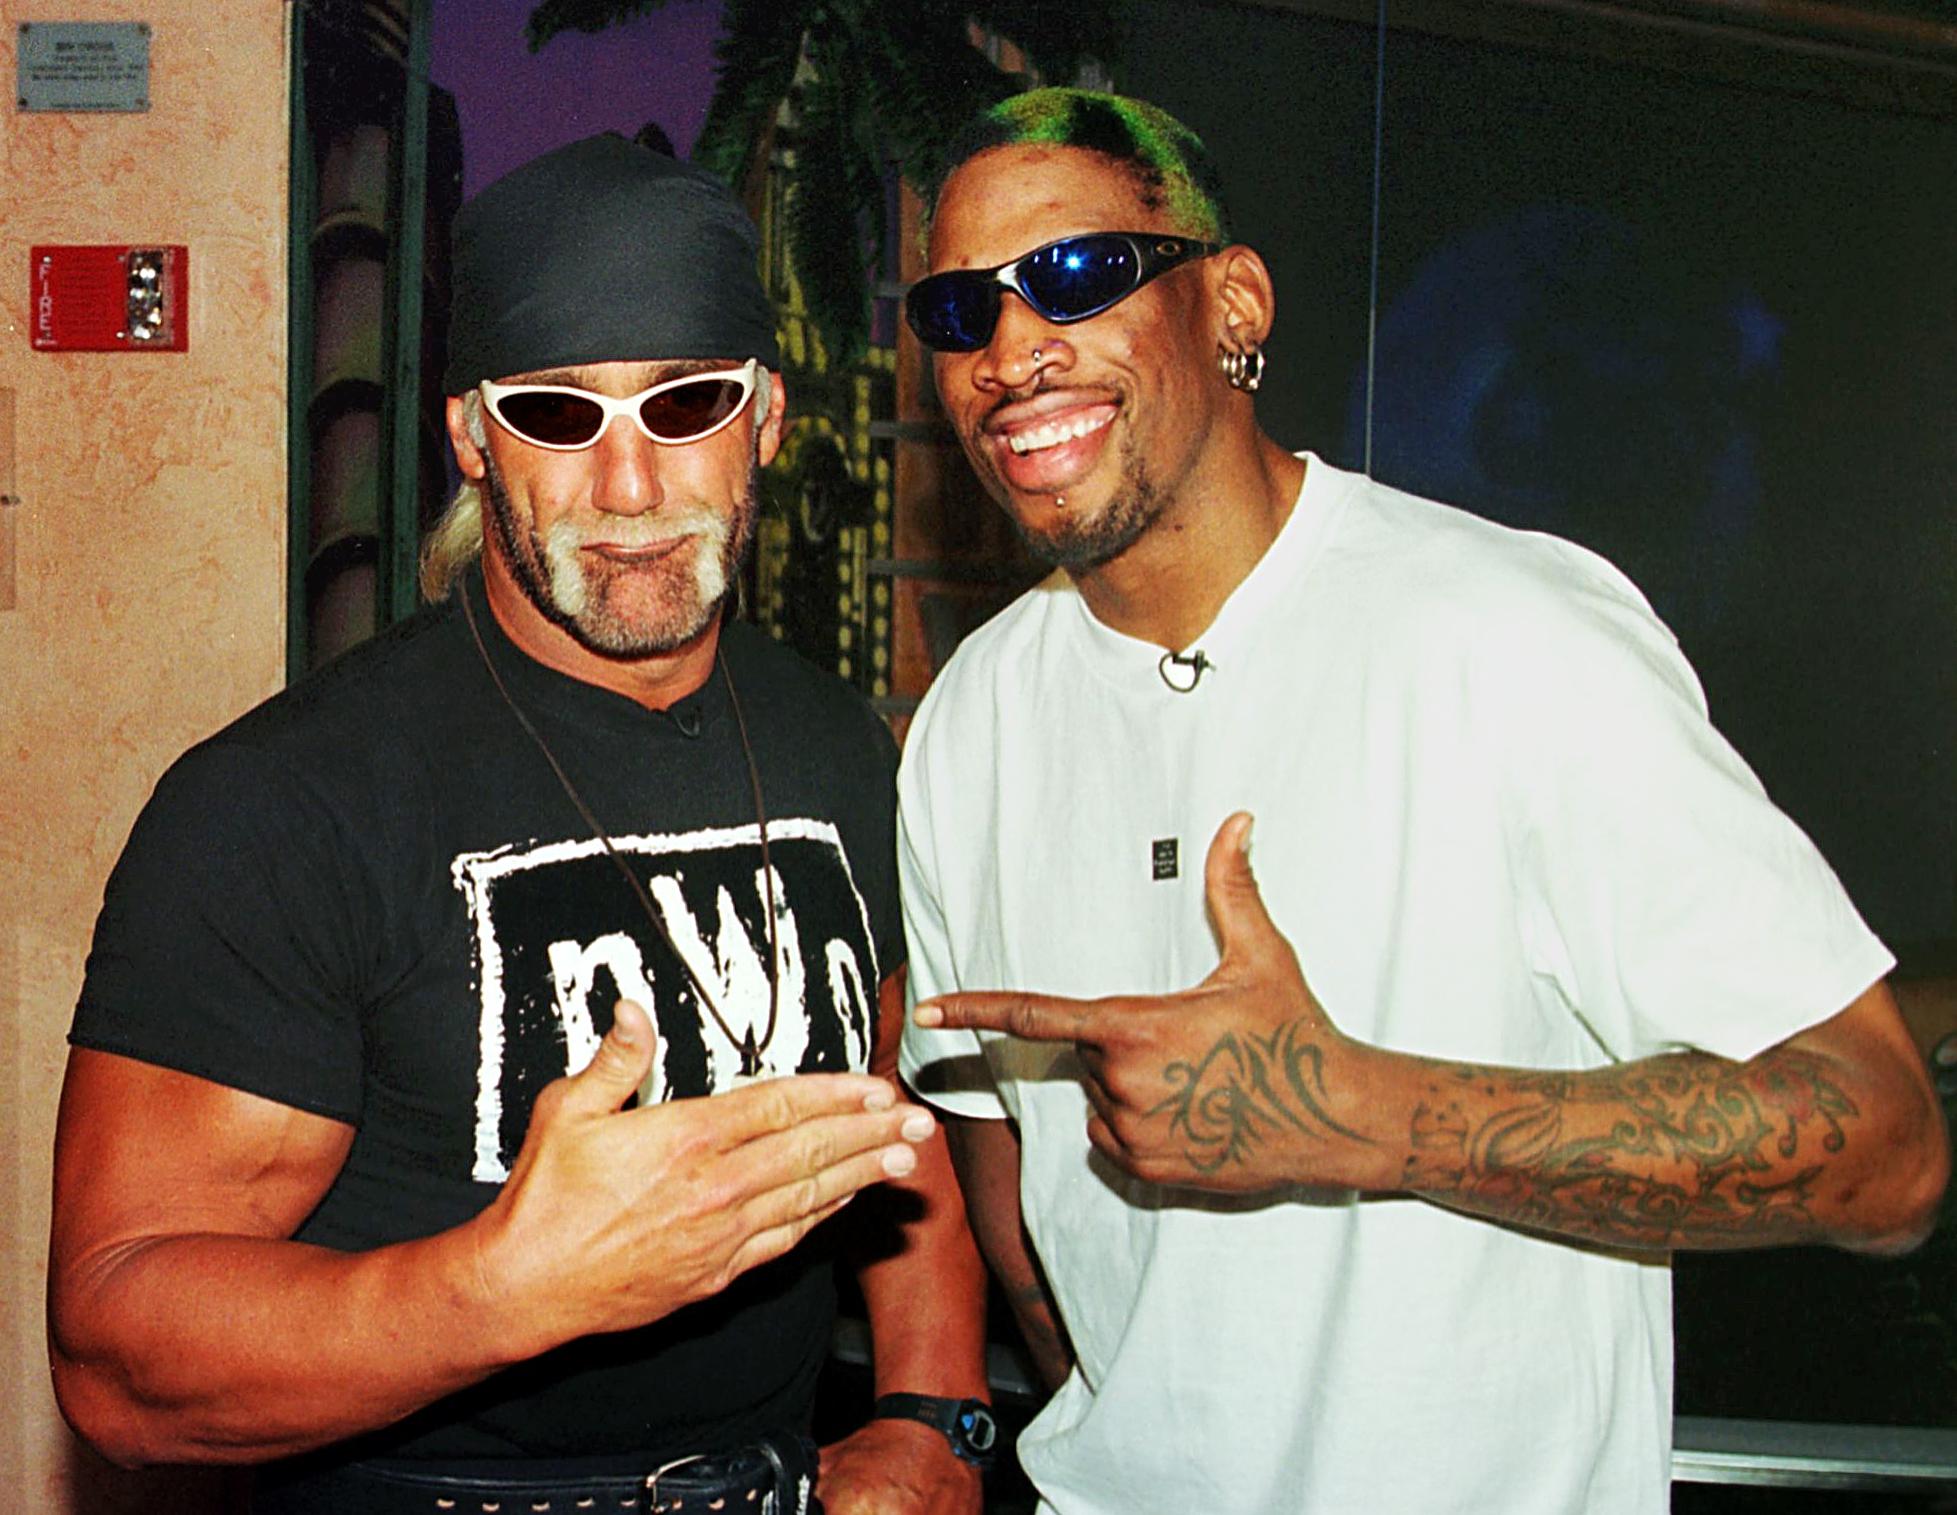 Dennis Rodman (R) of the Chicago Bulls poses with pro wrestler Hulk Hogan on June 18, 1998. (MIKE NELSON/AFP/Getty Images)